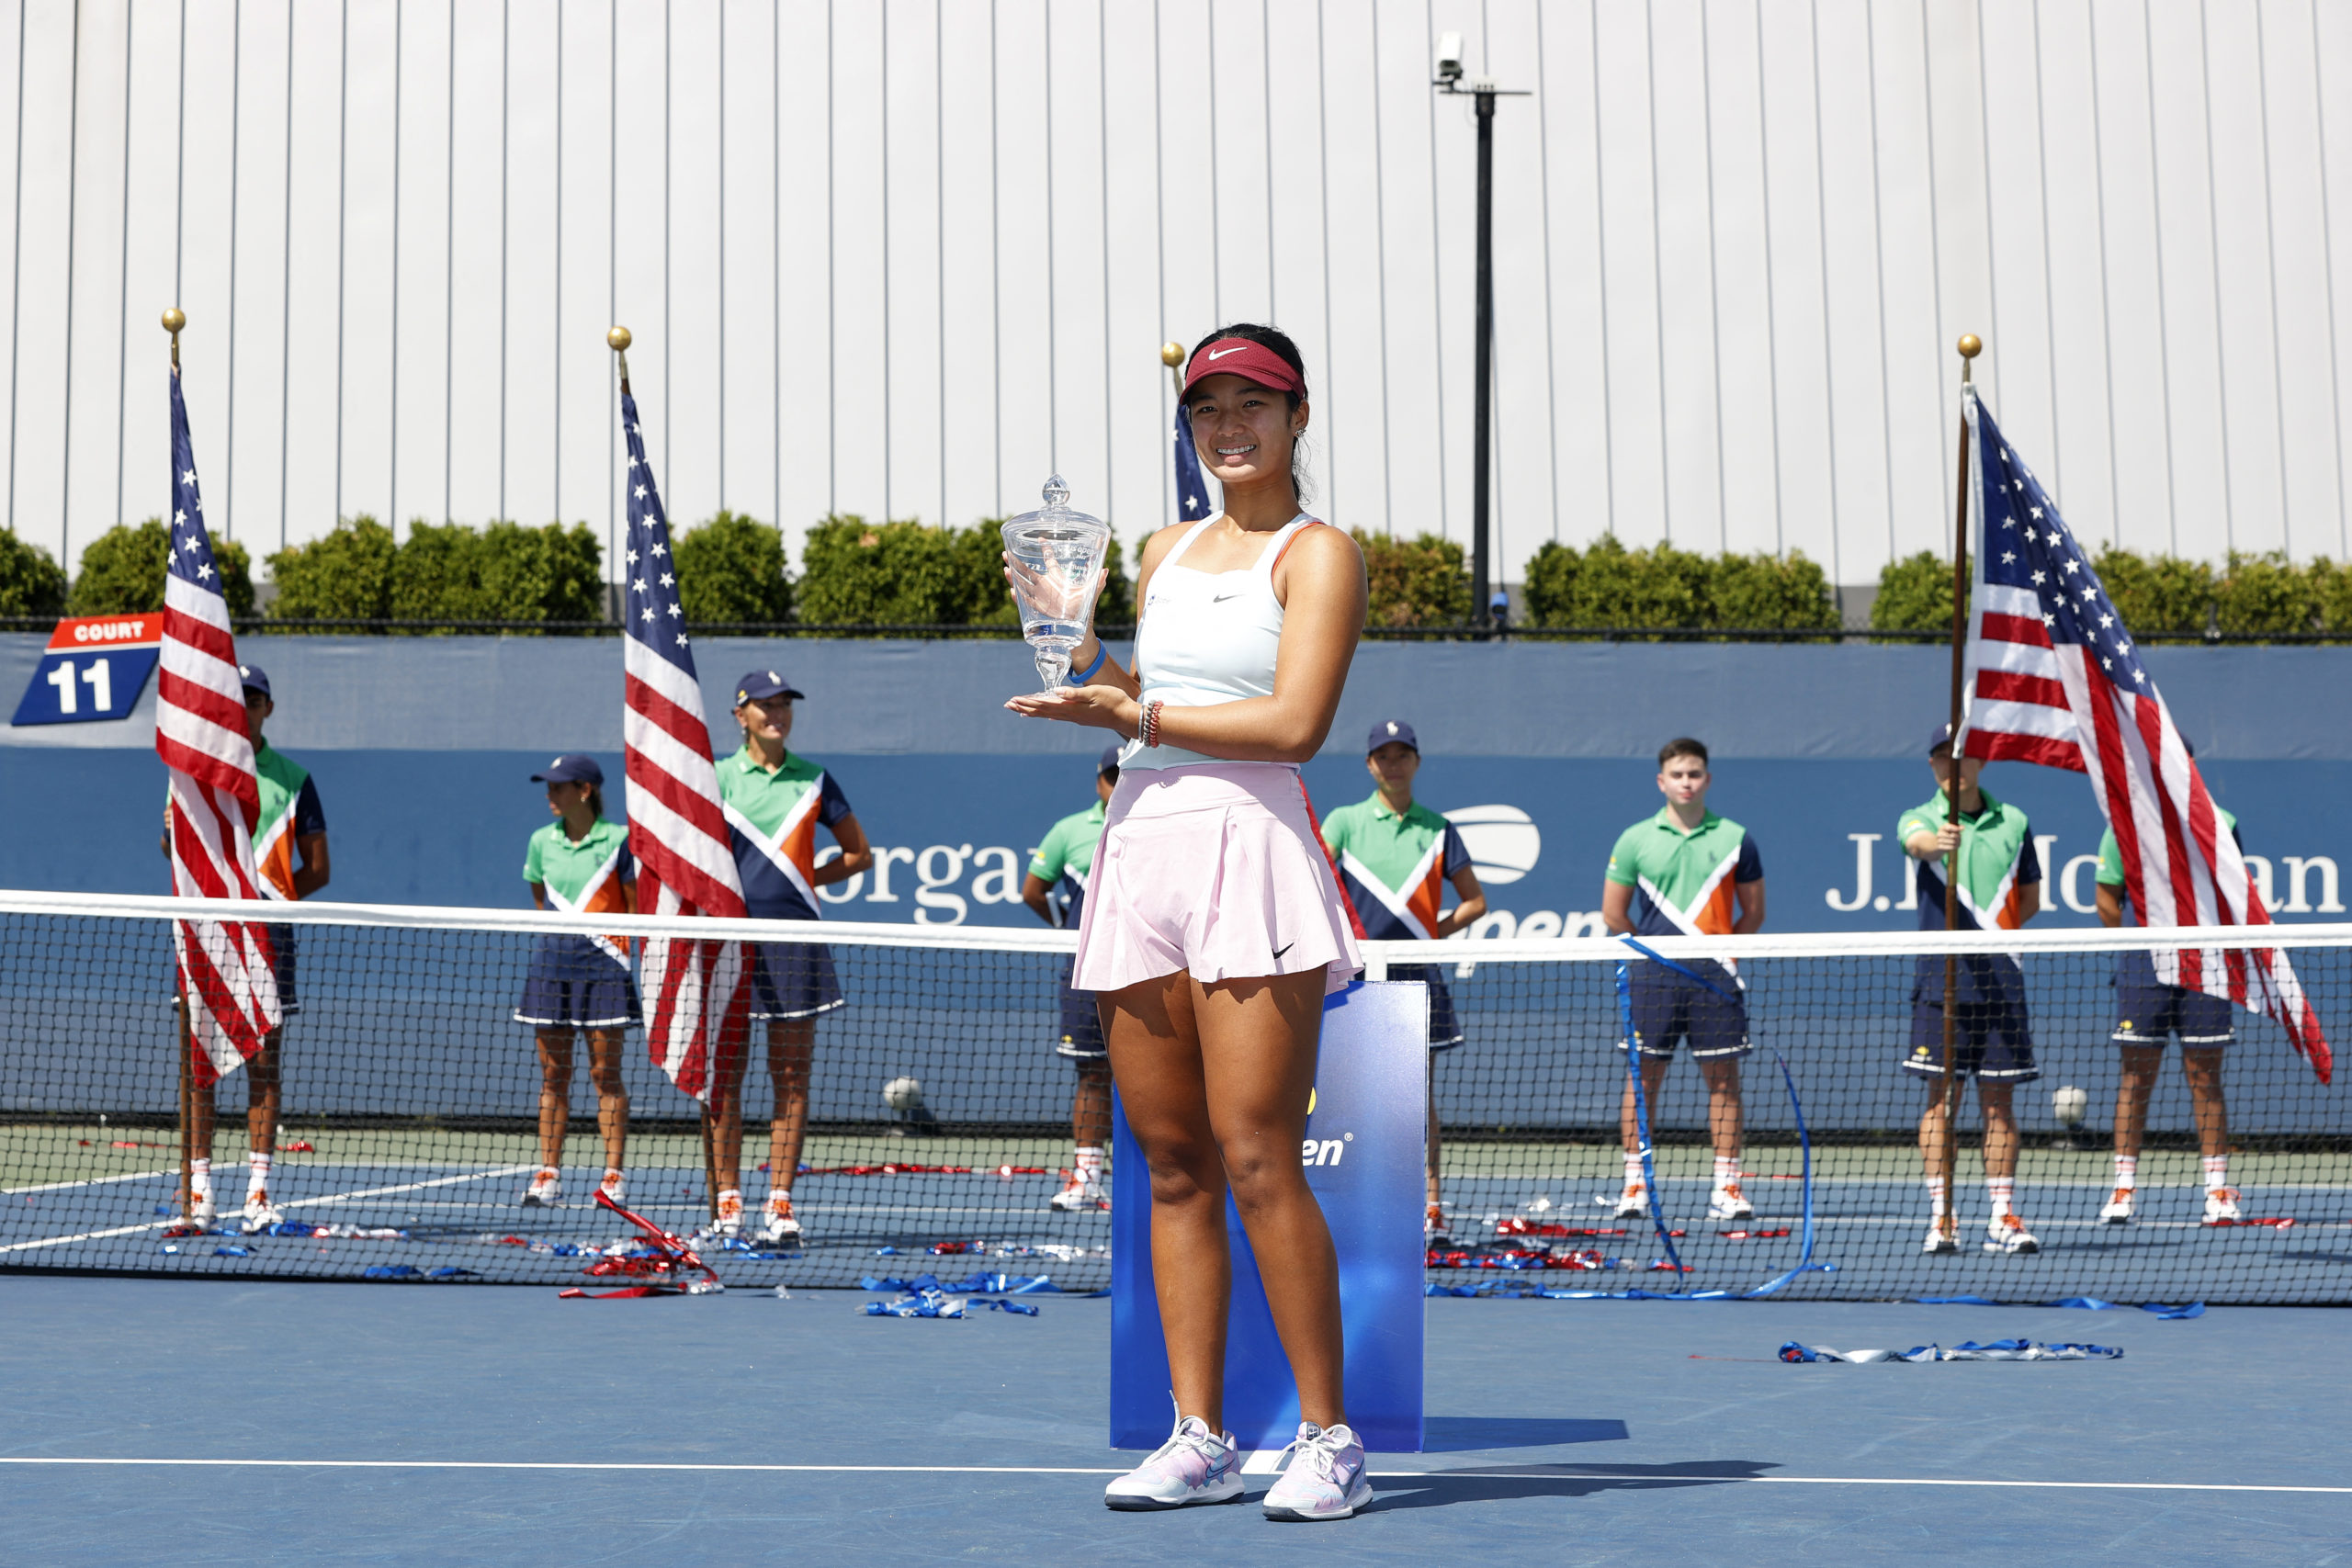 Alexandra Eala of the Philippines celebrates with the championship trophy after defeating Lucie Havlickova of the Czech Republic in their Junior Women's Singles Final on Day 13 of the 2022 US Open at the USTA National Tennis Center Billie Jean King on September 10, 2022 in the Flushing neighborhood of the Queens borough of New York City.